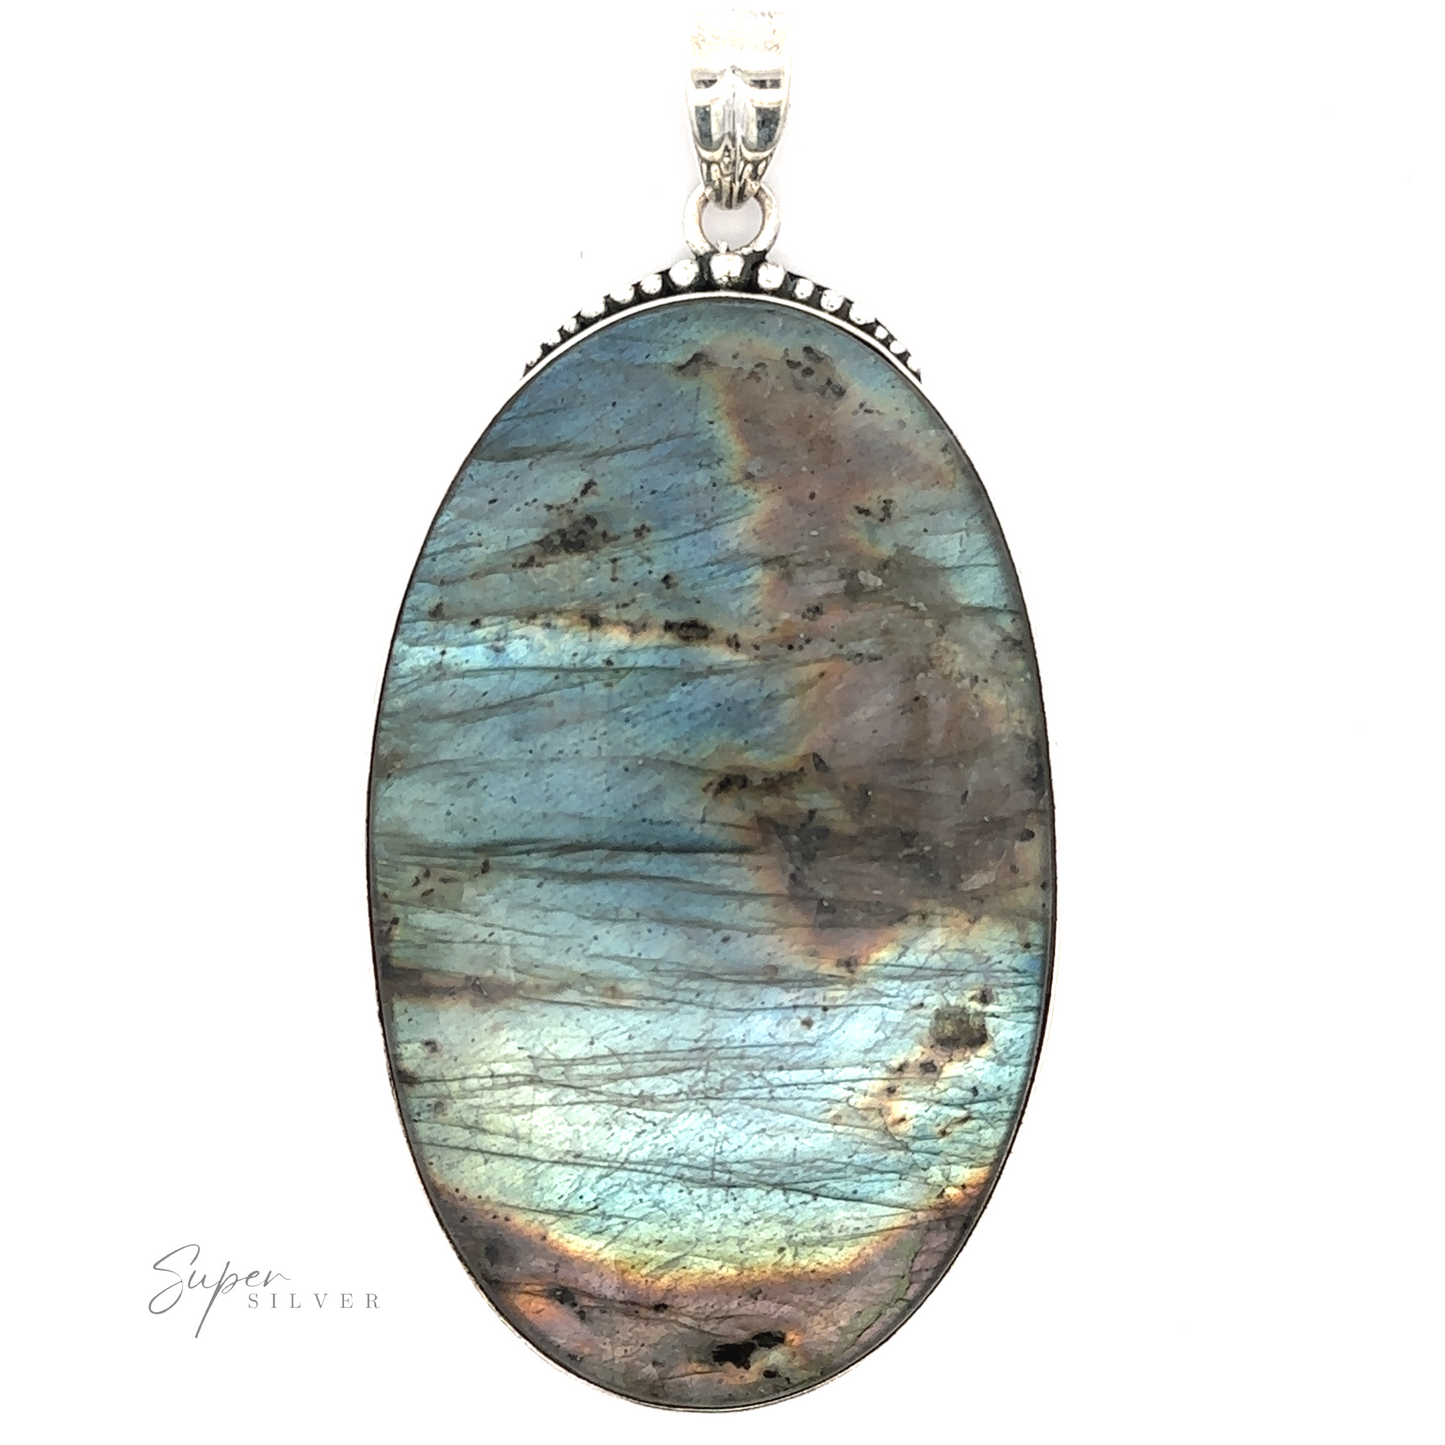 
                  
                    A stunning **XL Statement Oval Labradorite Pendant** featuring an oval, iridescent labradorite stone encased in a sleek silver setting with a loop for a chain. The words "Super Silver" are inscribed in the bottom left corner, making this exquisite piece a standout addition to any Sterling Silver jewelry collection.
                  
                